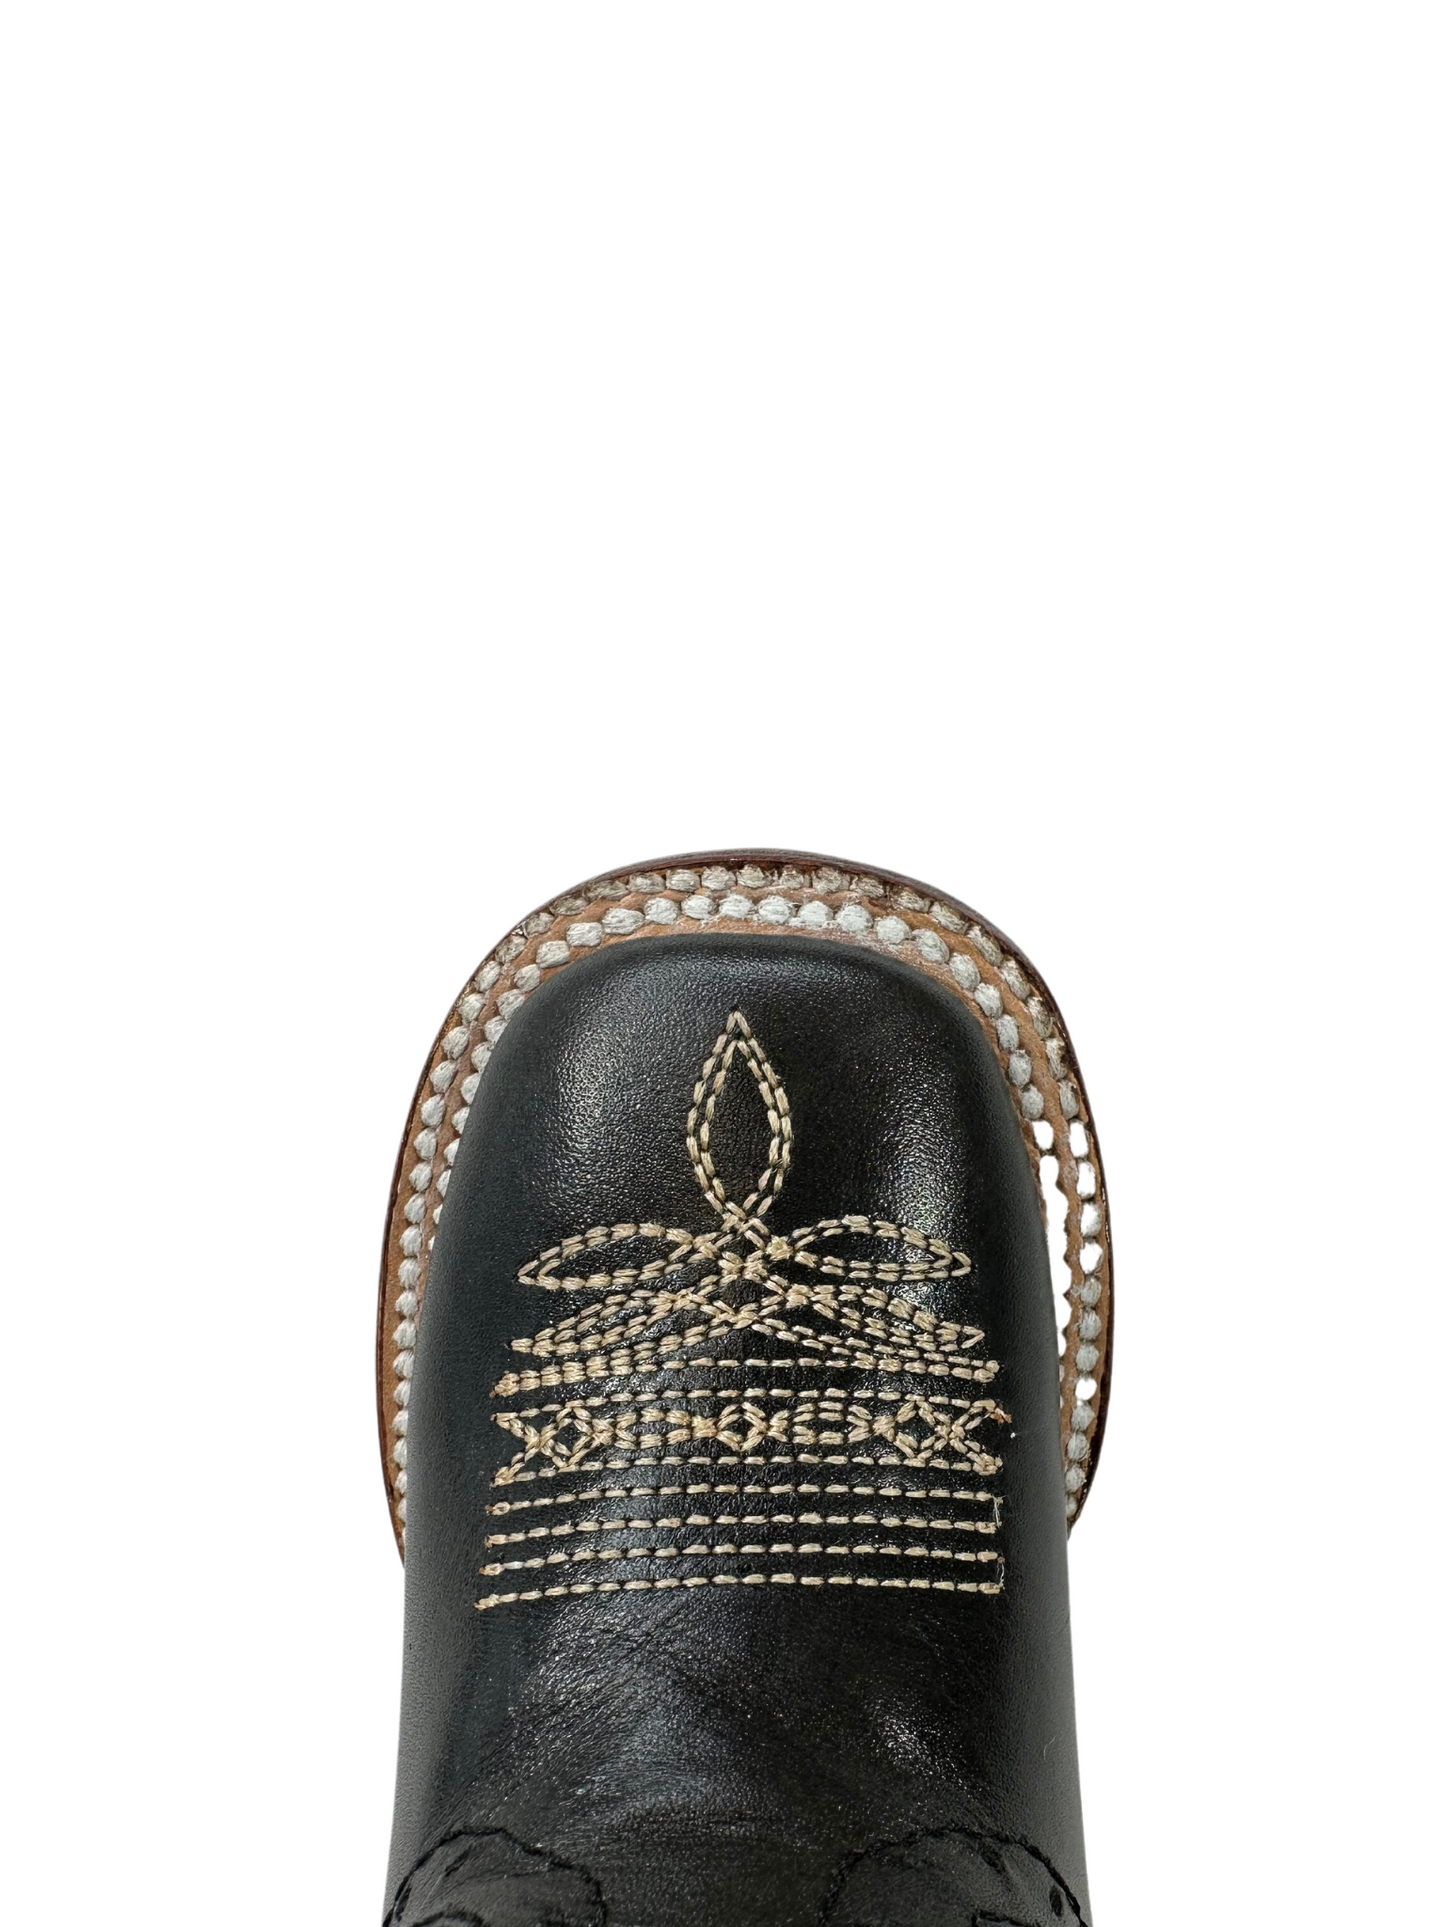 Hooch Girl's Black Leather Gold Stitched Boot